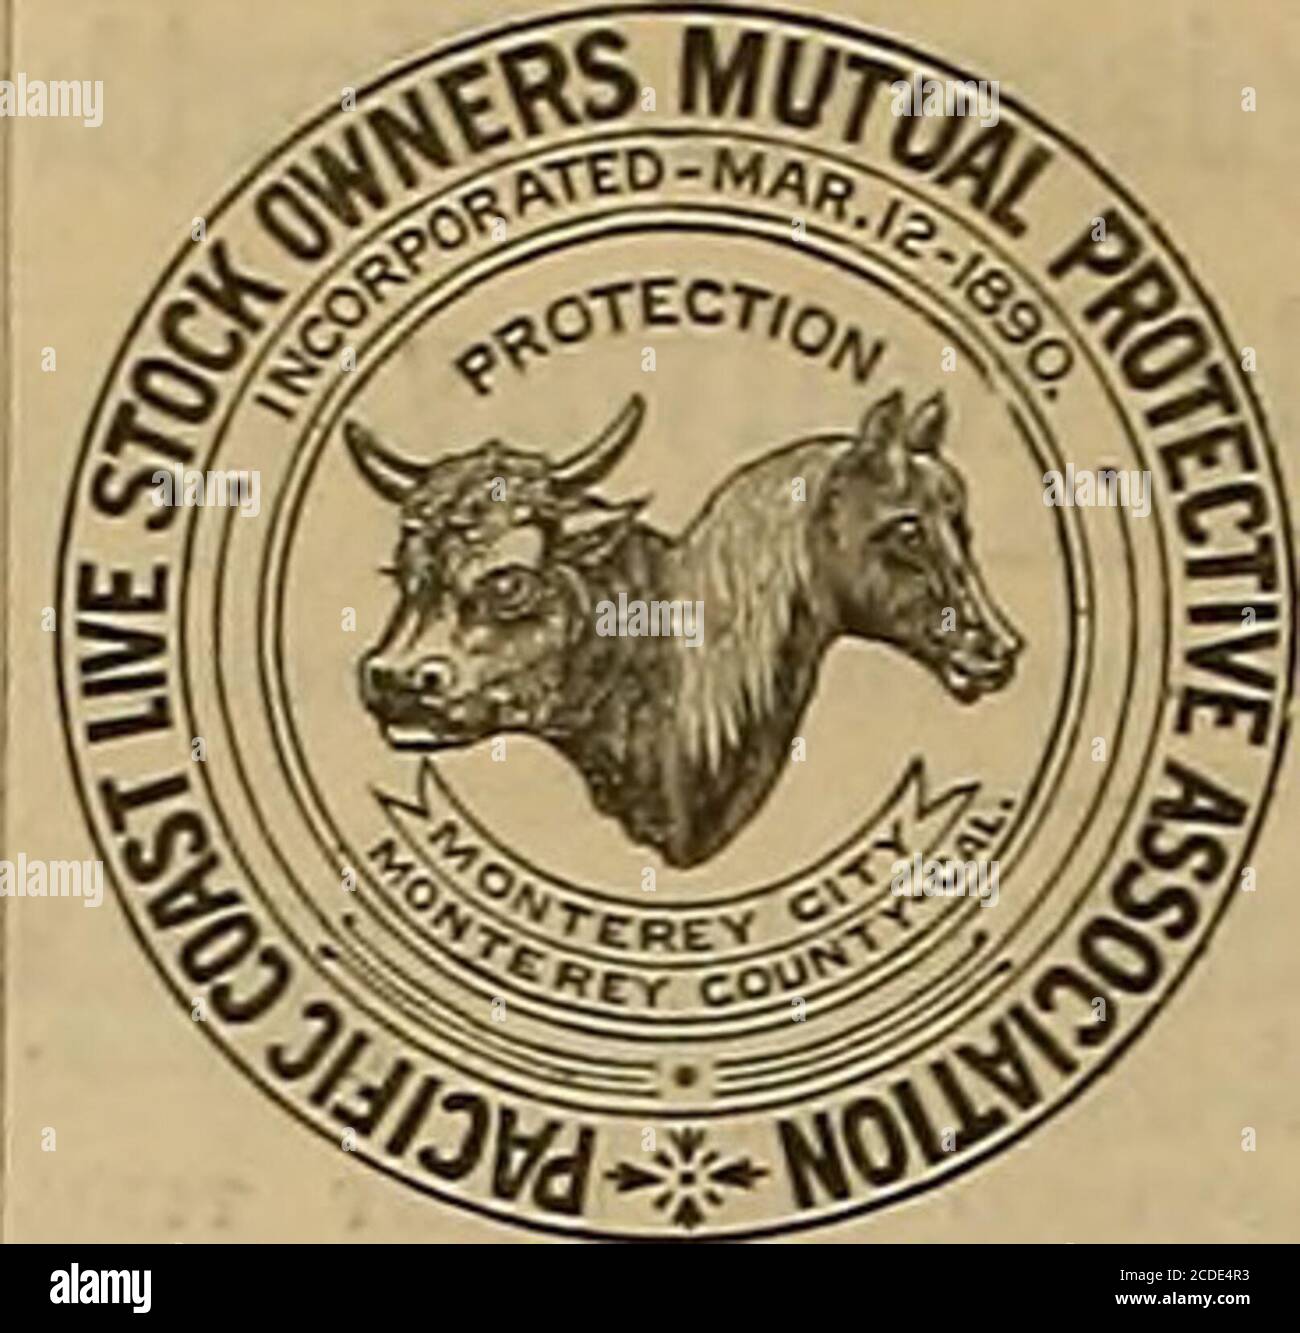 . Breeder and sportsman . The Pacific Coast Live Stock Owners V MUTUAL PROTECTIVE ASSN., MONTEREY, Monterey Co., Cal. TRlSTI ES: HOX. E. V. SARGENT, Pre&gt;ident, 0. W. GALLANAR. Secretary, JAMES E. PALMER, Business Manager, EDW, INGRAM, Vice-President.FRED. D. HOWARD, Ac.liar;,R. H. WILLEY, Attorney. GENERAL BlSIKESS OFFICE, Room S3, Flood Building corner Market and FourthStreets, San Francisco, tal. VOLNEY HOWARD, Onera! Manager. Attention. t=UO Stock Photo